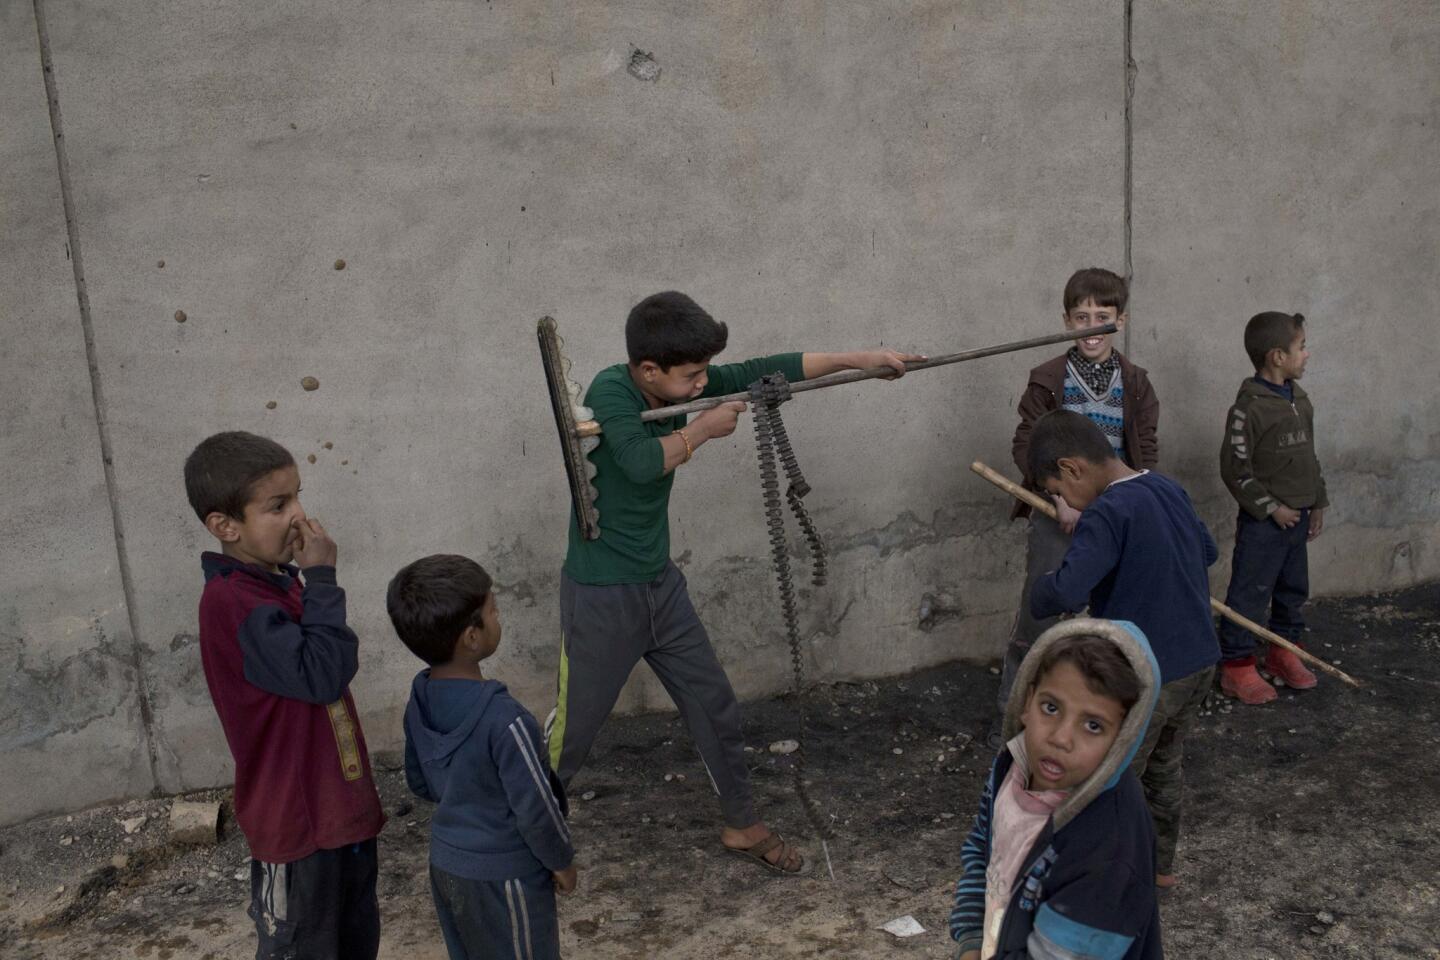 Children play in Qayara, some 50 kilometers south of Mosul, Iraq, on Nov. 10, 2016. Iraqi troops consolidated gains in their advance on the northern city of Mosul on Thursday, regrouping as they clear neighborhoods and houses once occupied by the Islamic State group.